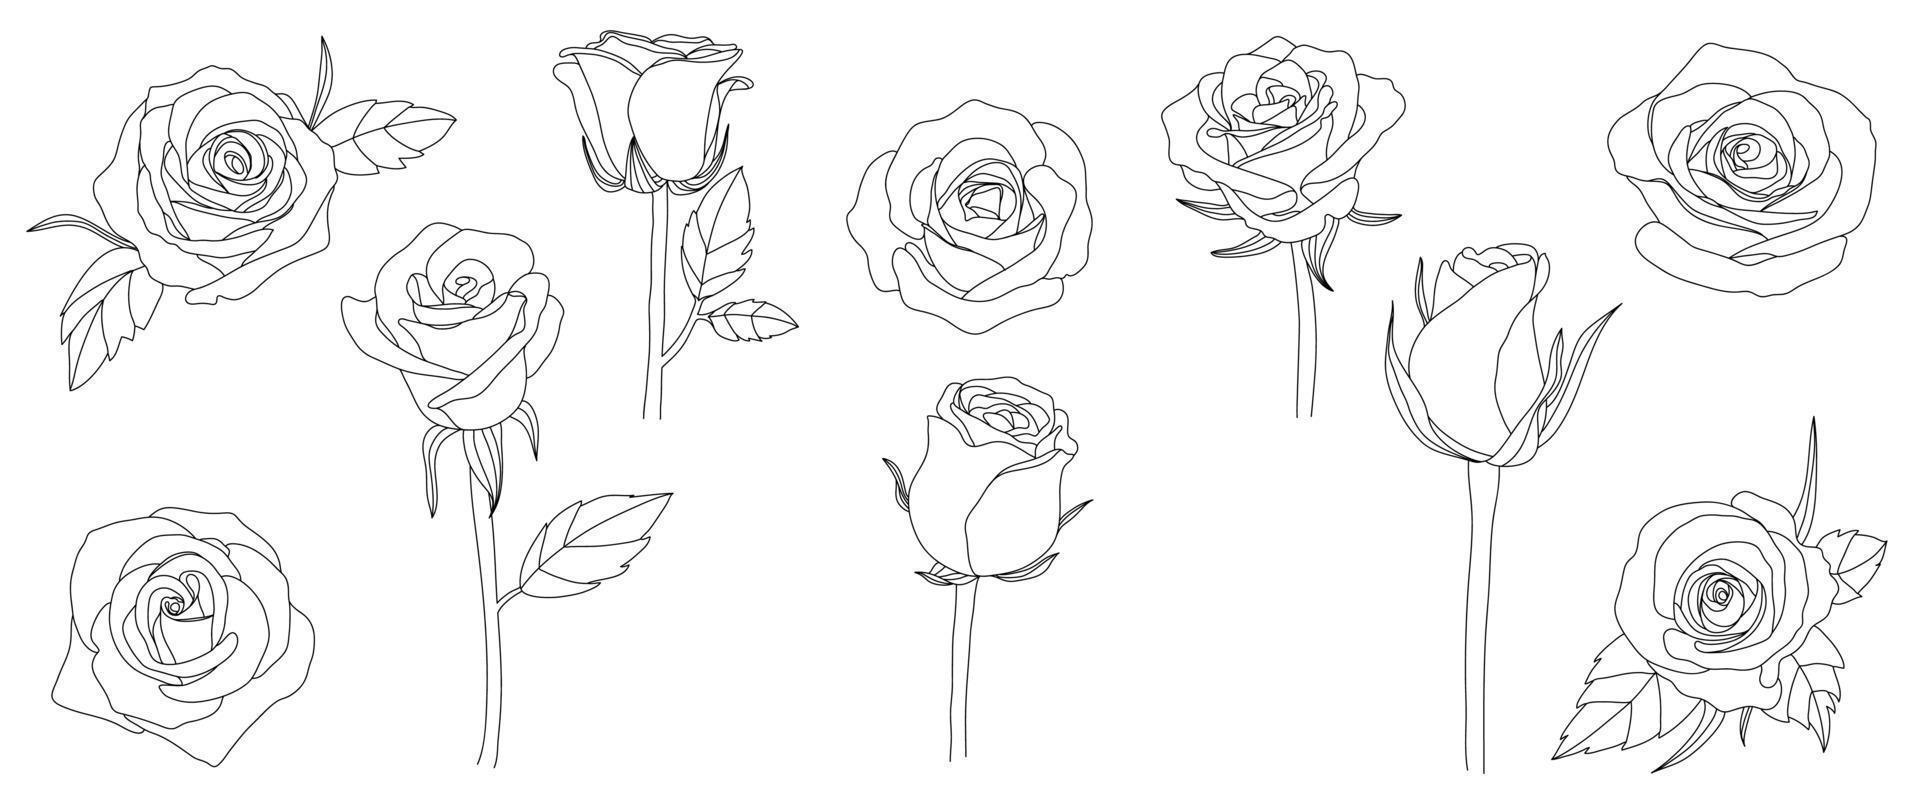 Set of hand drawn line art rose flowers vector. Floral element collection of black white drawing contour simple rose flowers. Design illustration for prints, logos, cosmetics, poster, card, branding. vector